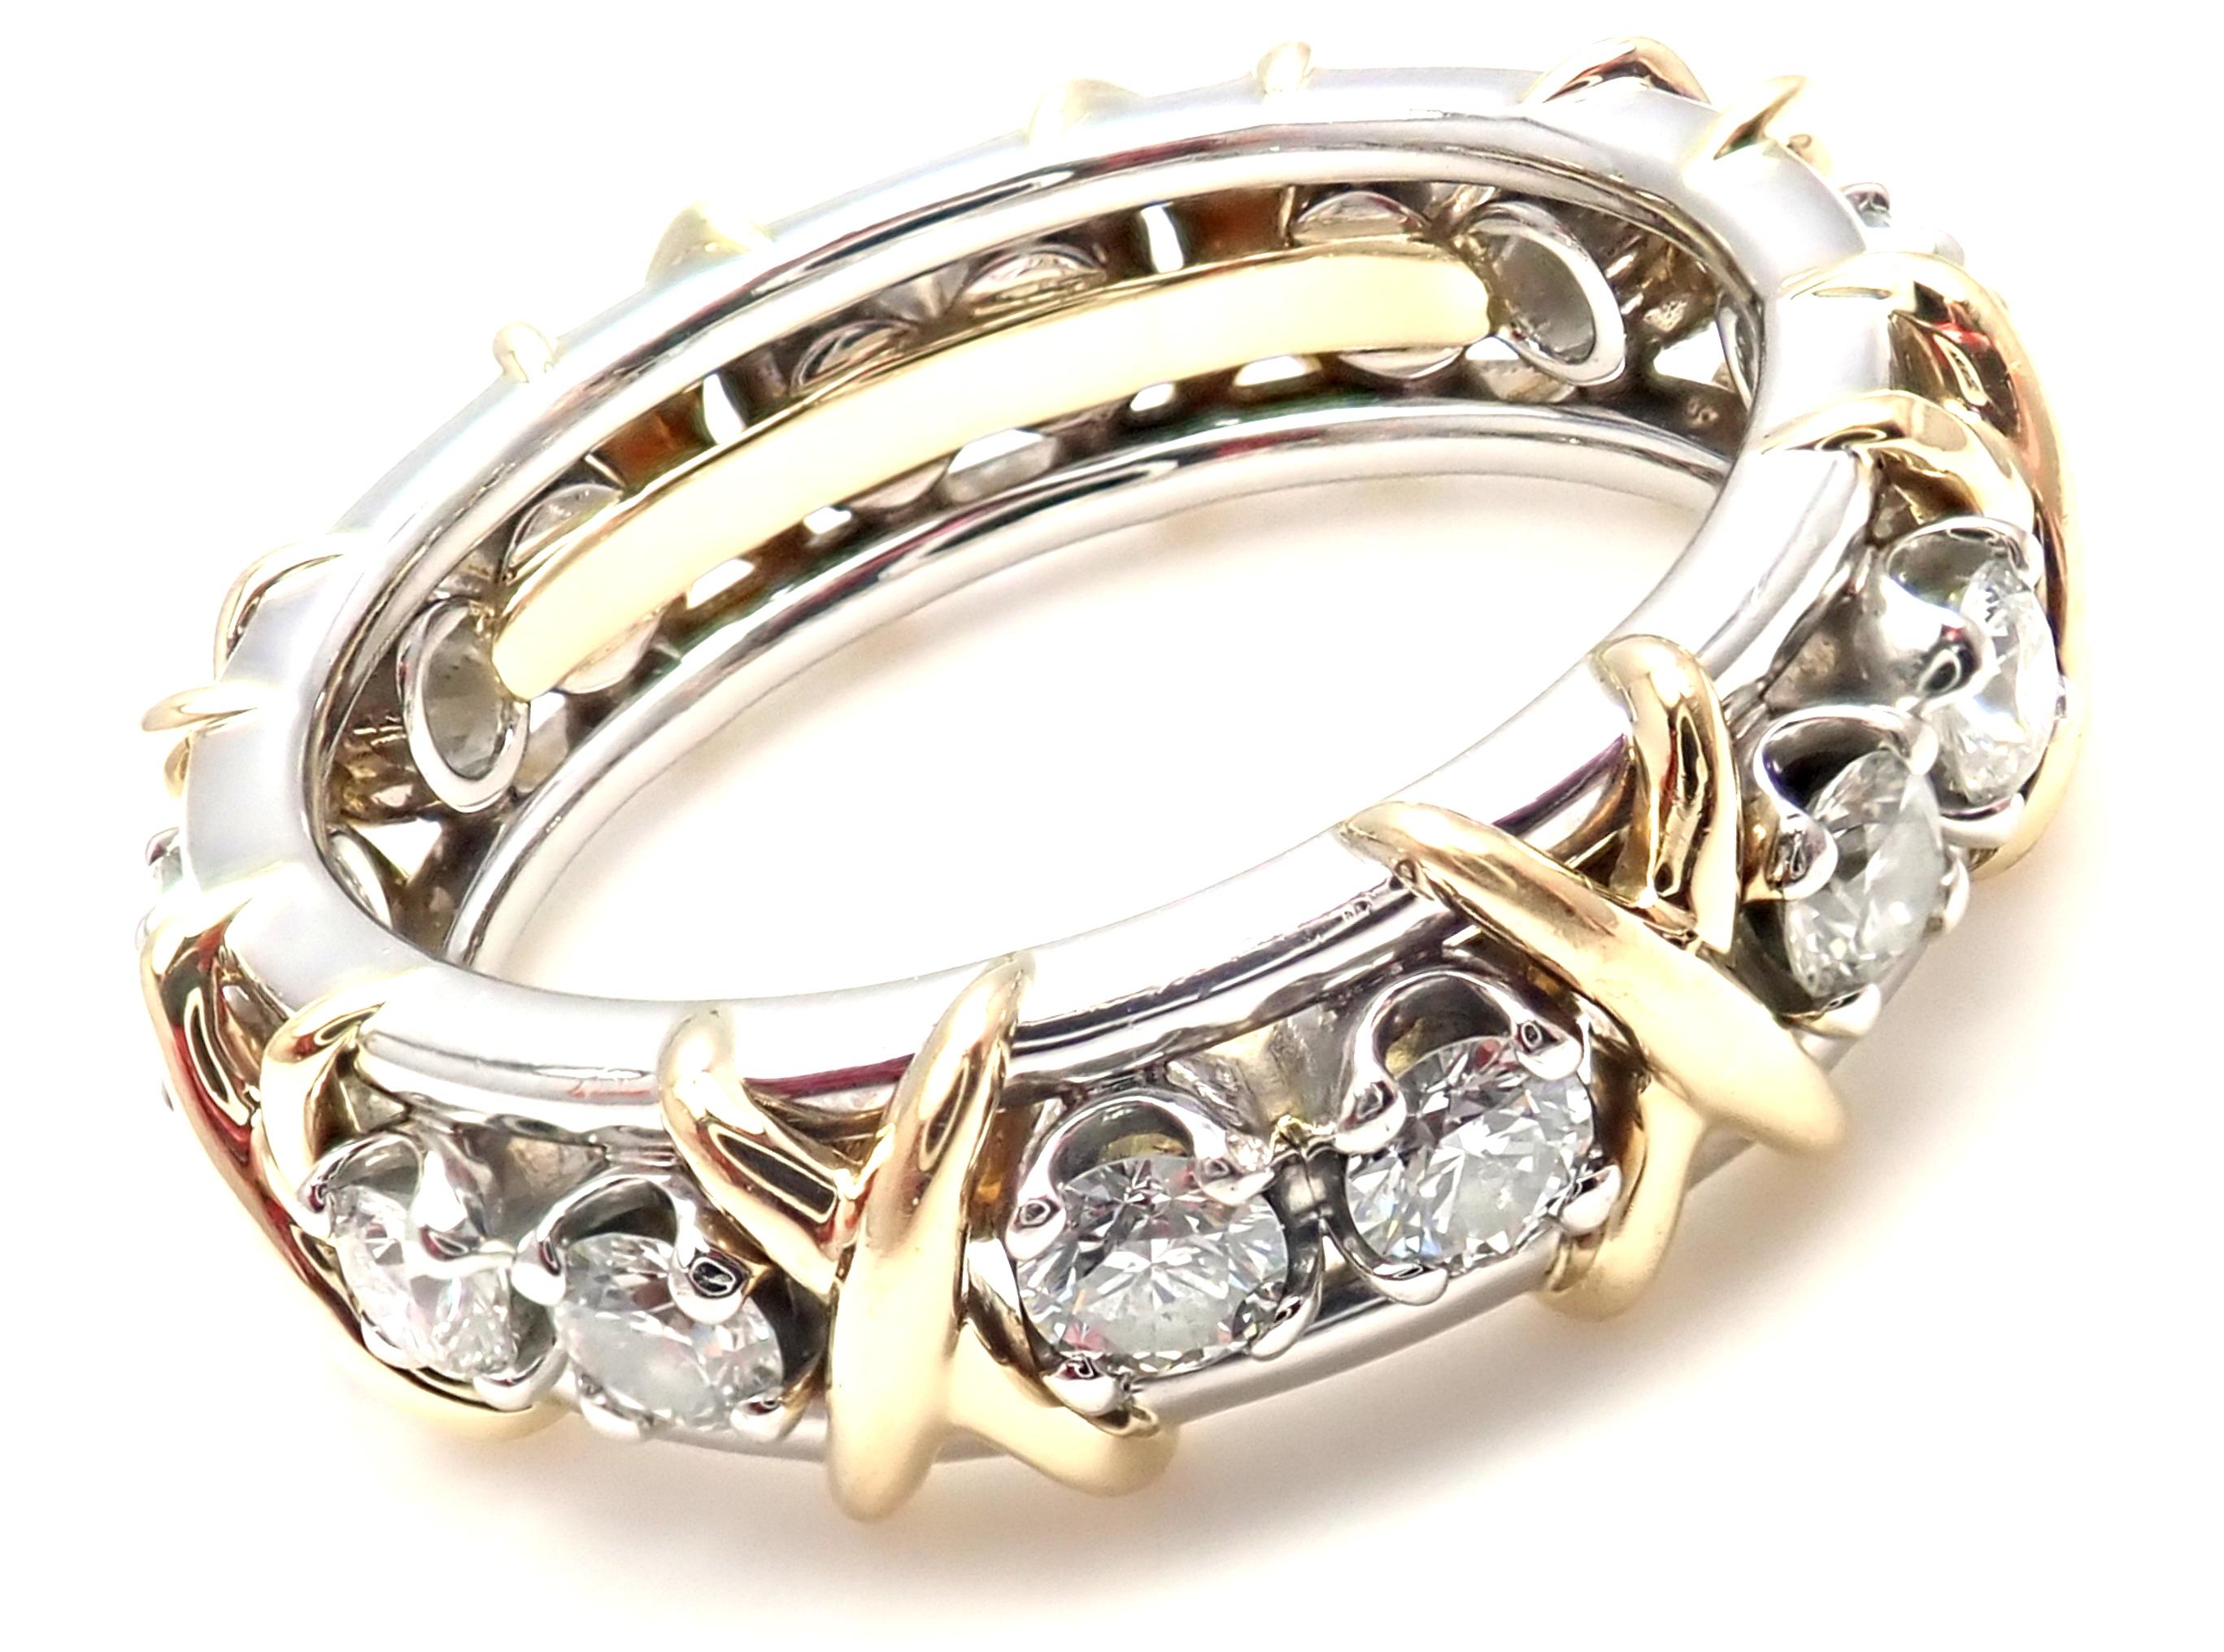 18k Yellow Gold & Platinum Diamond Jean Schlumberger Band Ring designed for Tiffany & Co. 
With 16 Round Brilliant Cut Diamonds VS1 clarity, G color, Total weight Approx 1.14ct
This ring comes with Tiffany & Co box.
Details:
Ring Size: 5 1/4
Weight: